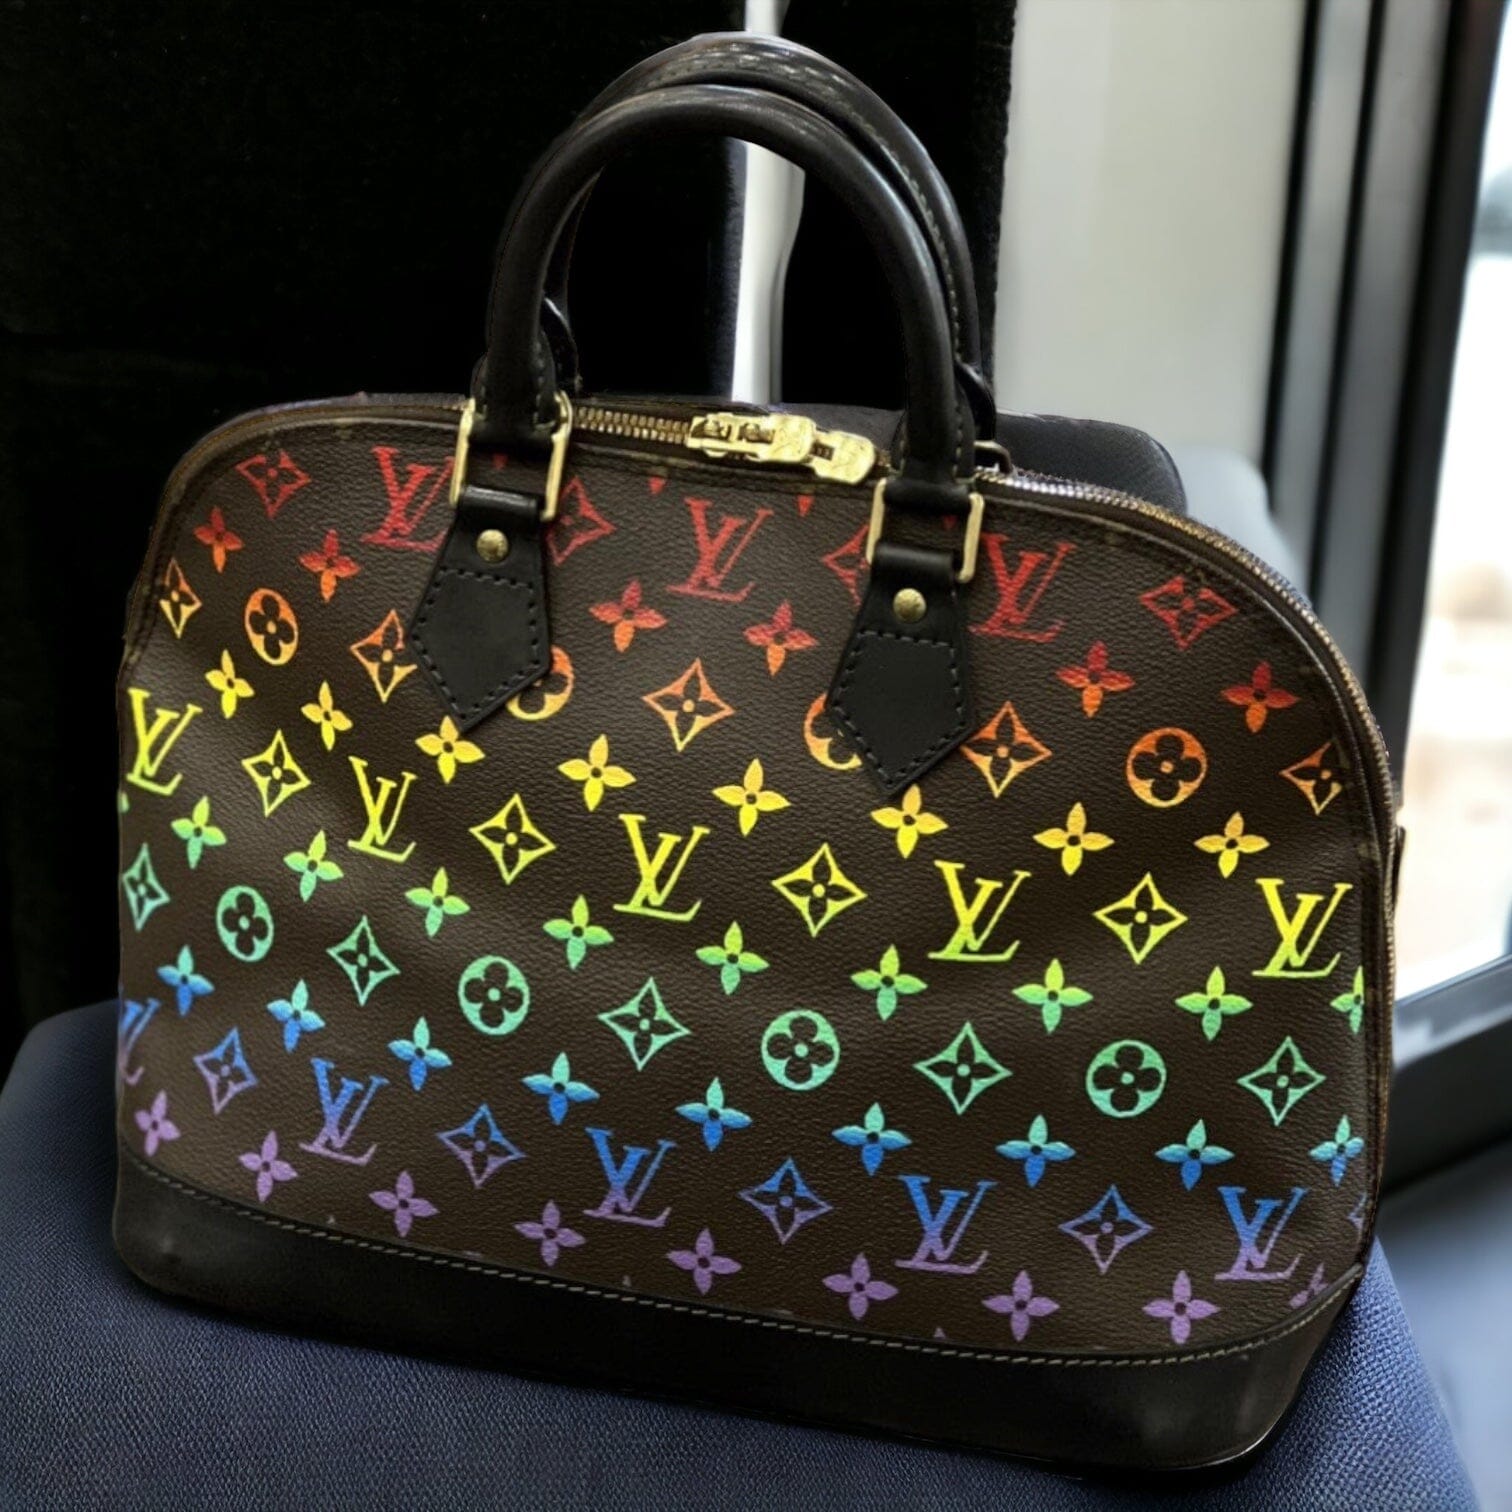 Hand Painted Louis Vuitton Alma Full of Color Artwork Painted on Both Sides